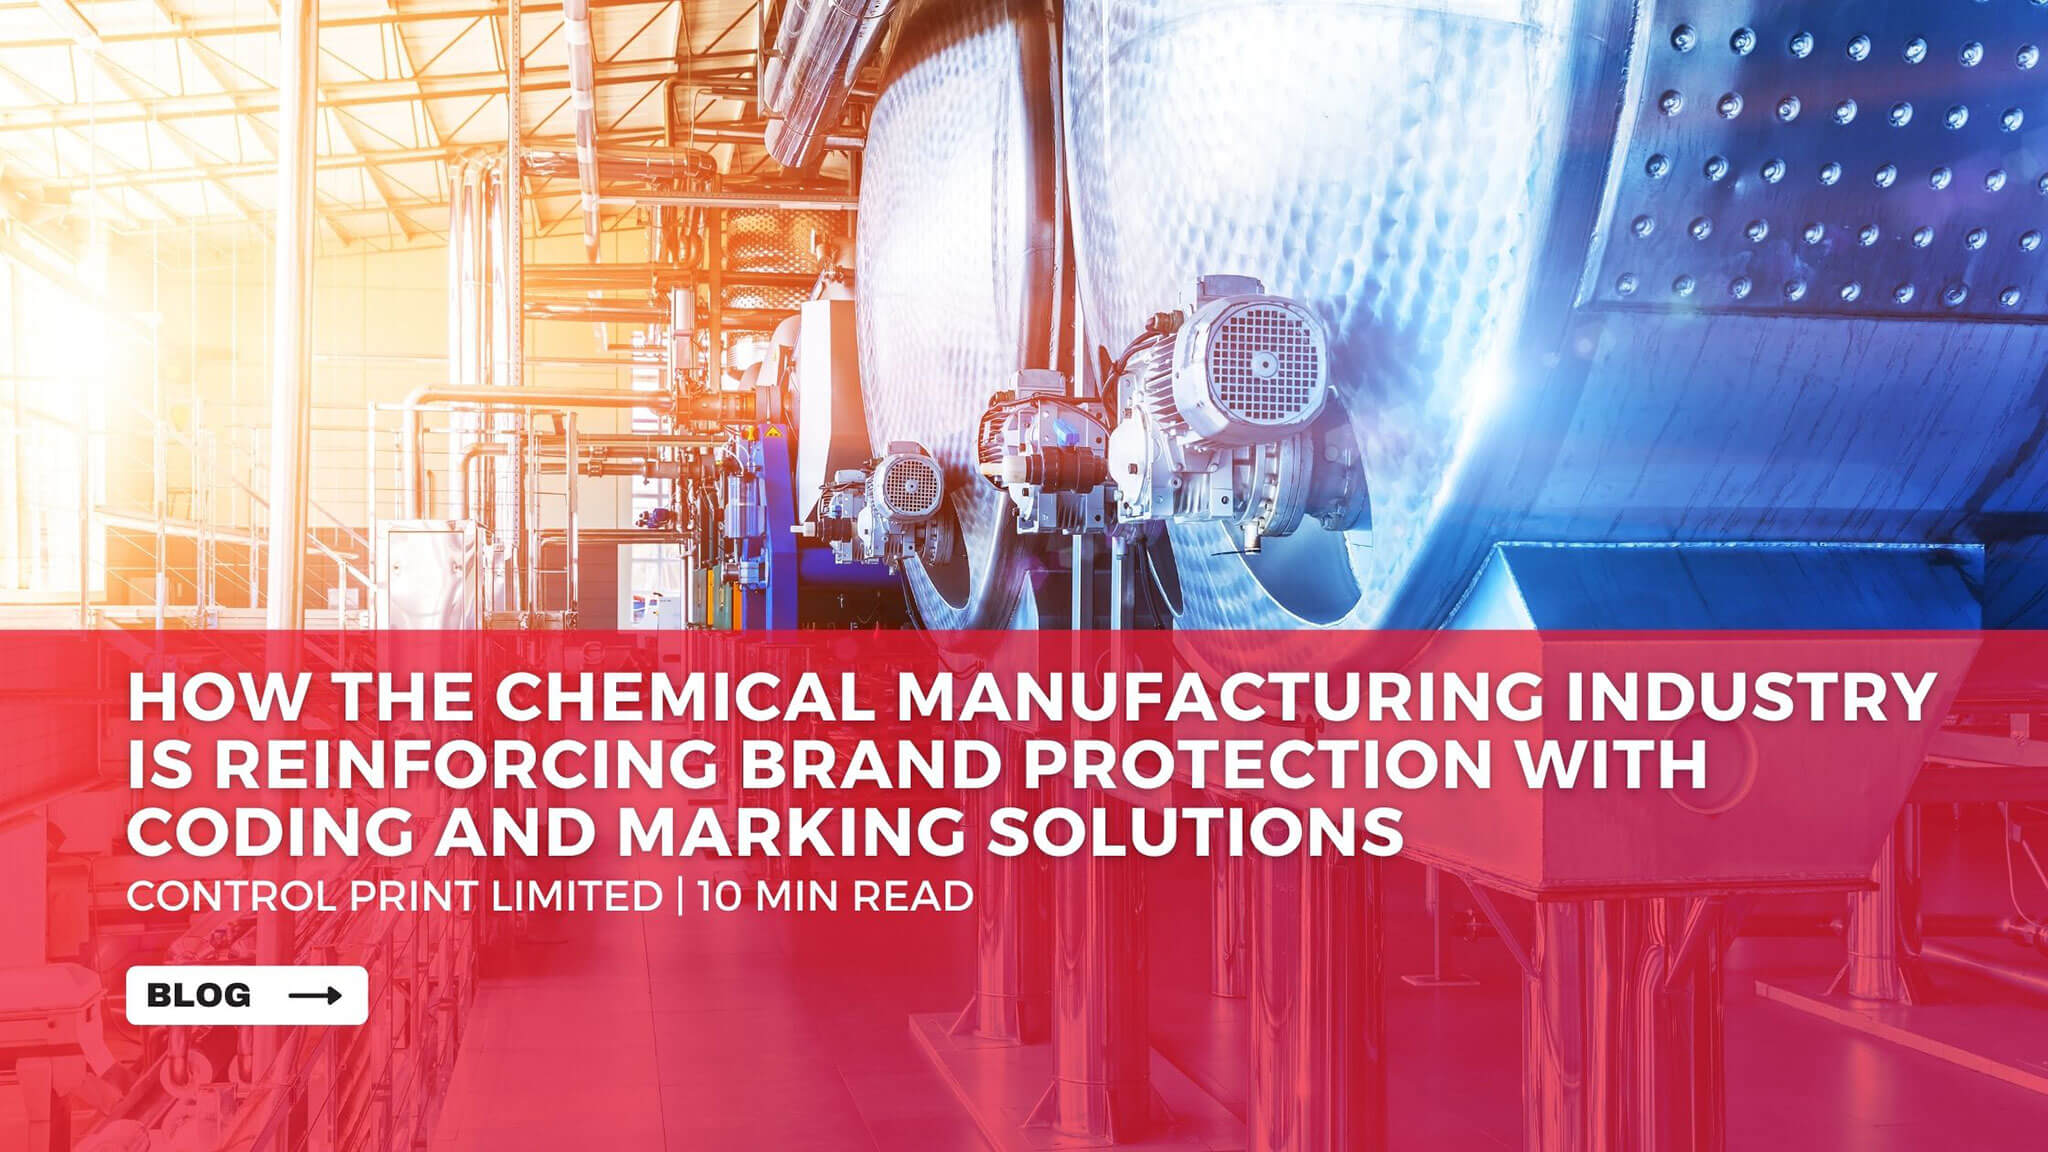 How the chemical manufacturing industry is reinforcing brand protection with coding and marking solutions